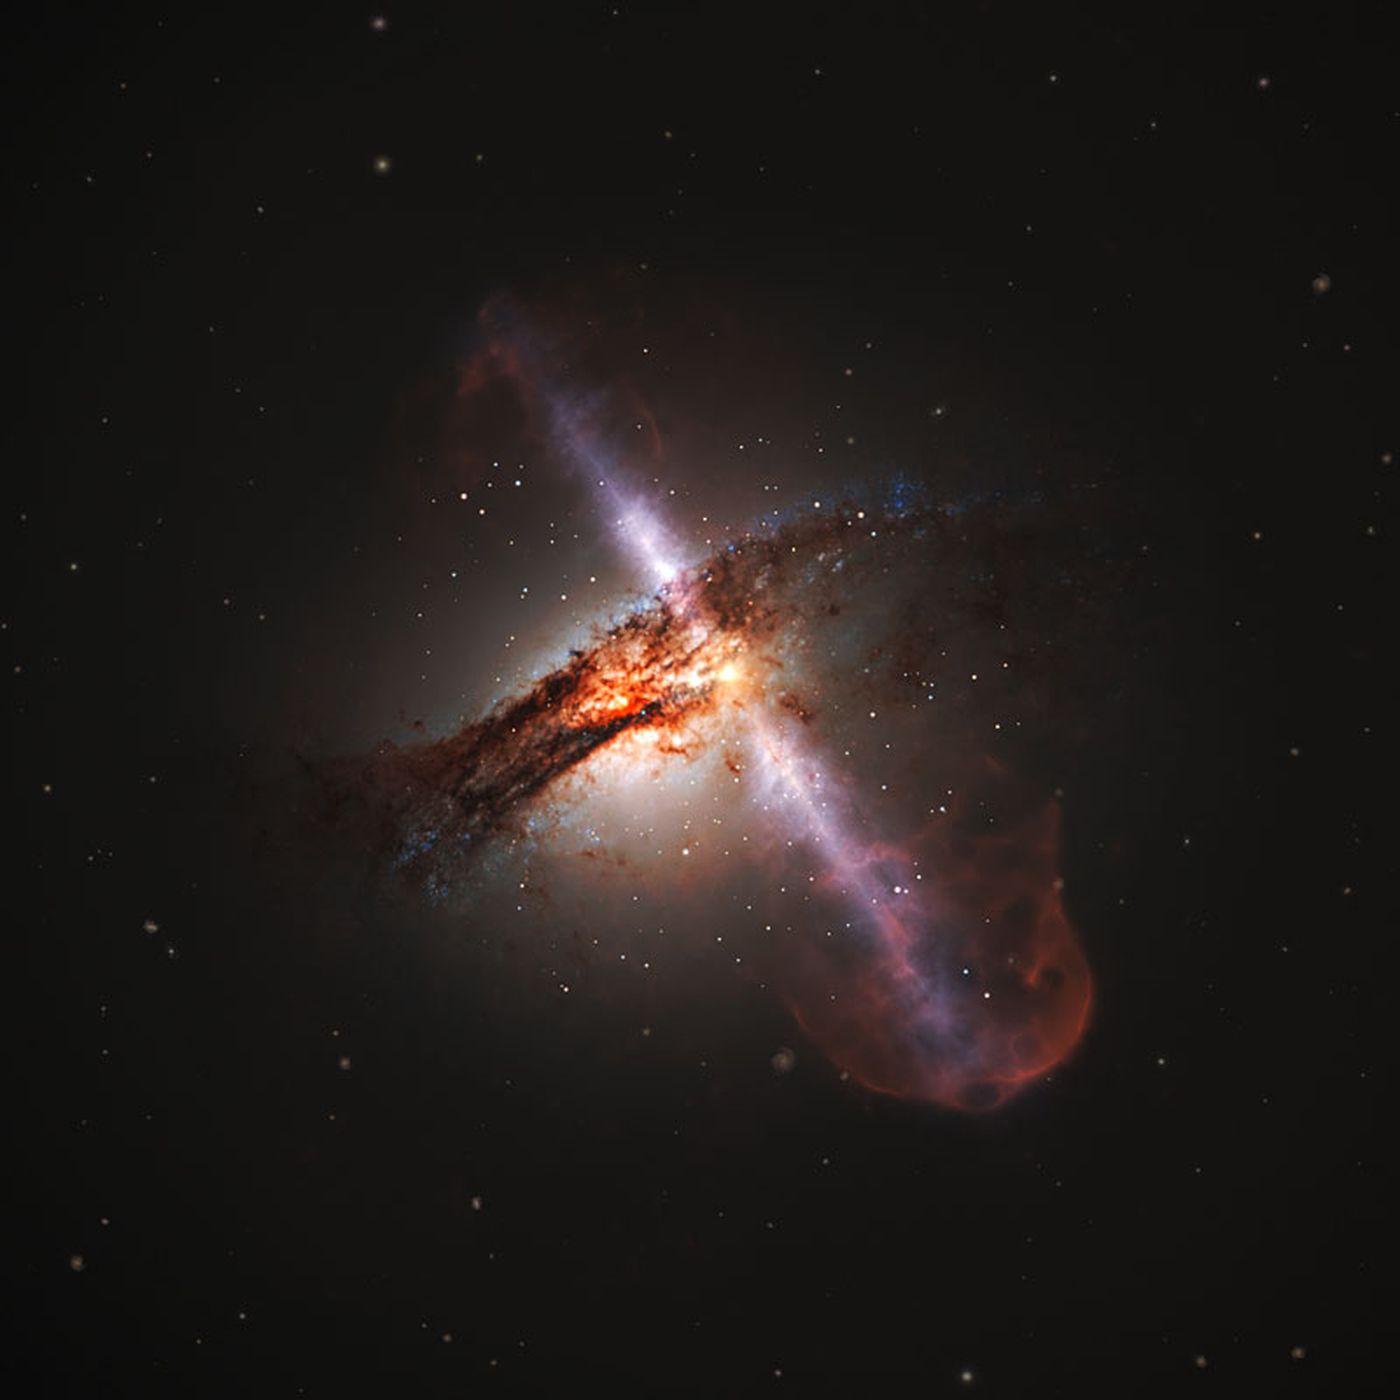 Most image of black holes are illustrations. Here's what our